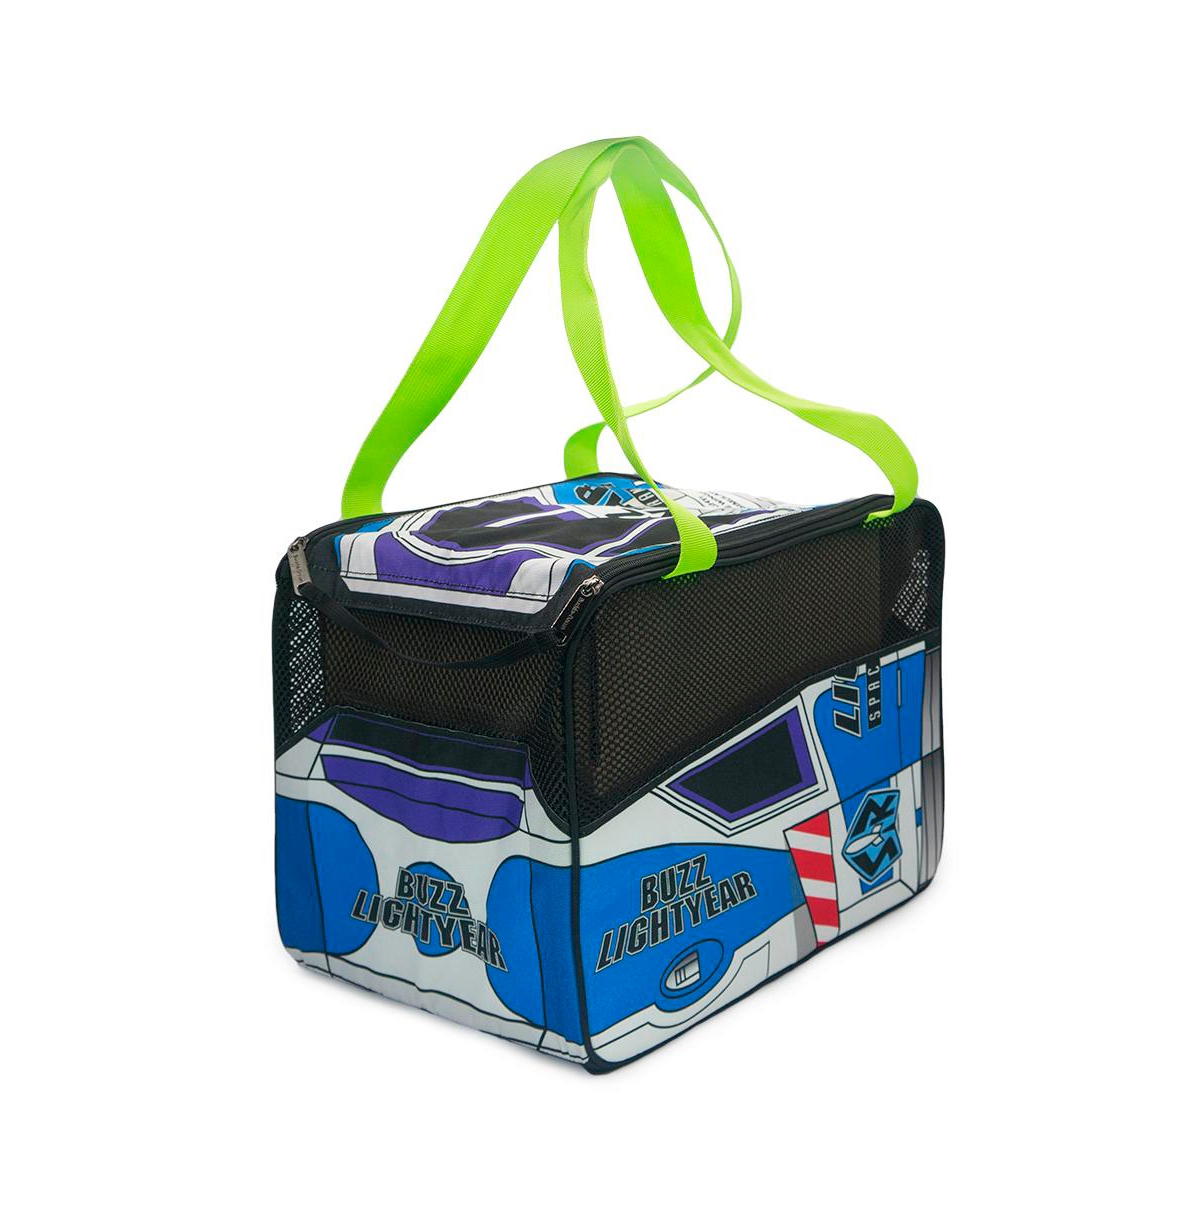 Disney Pet Carrier, Toy Story Buzz Lightyear Spaceship, Dog Cat Bunny Carrying Case - Black